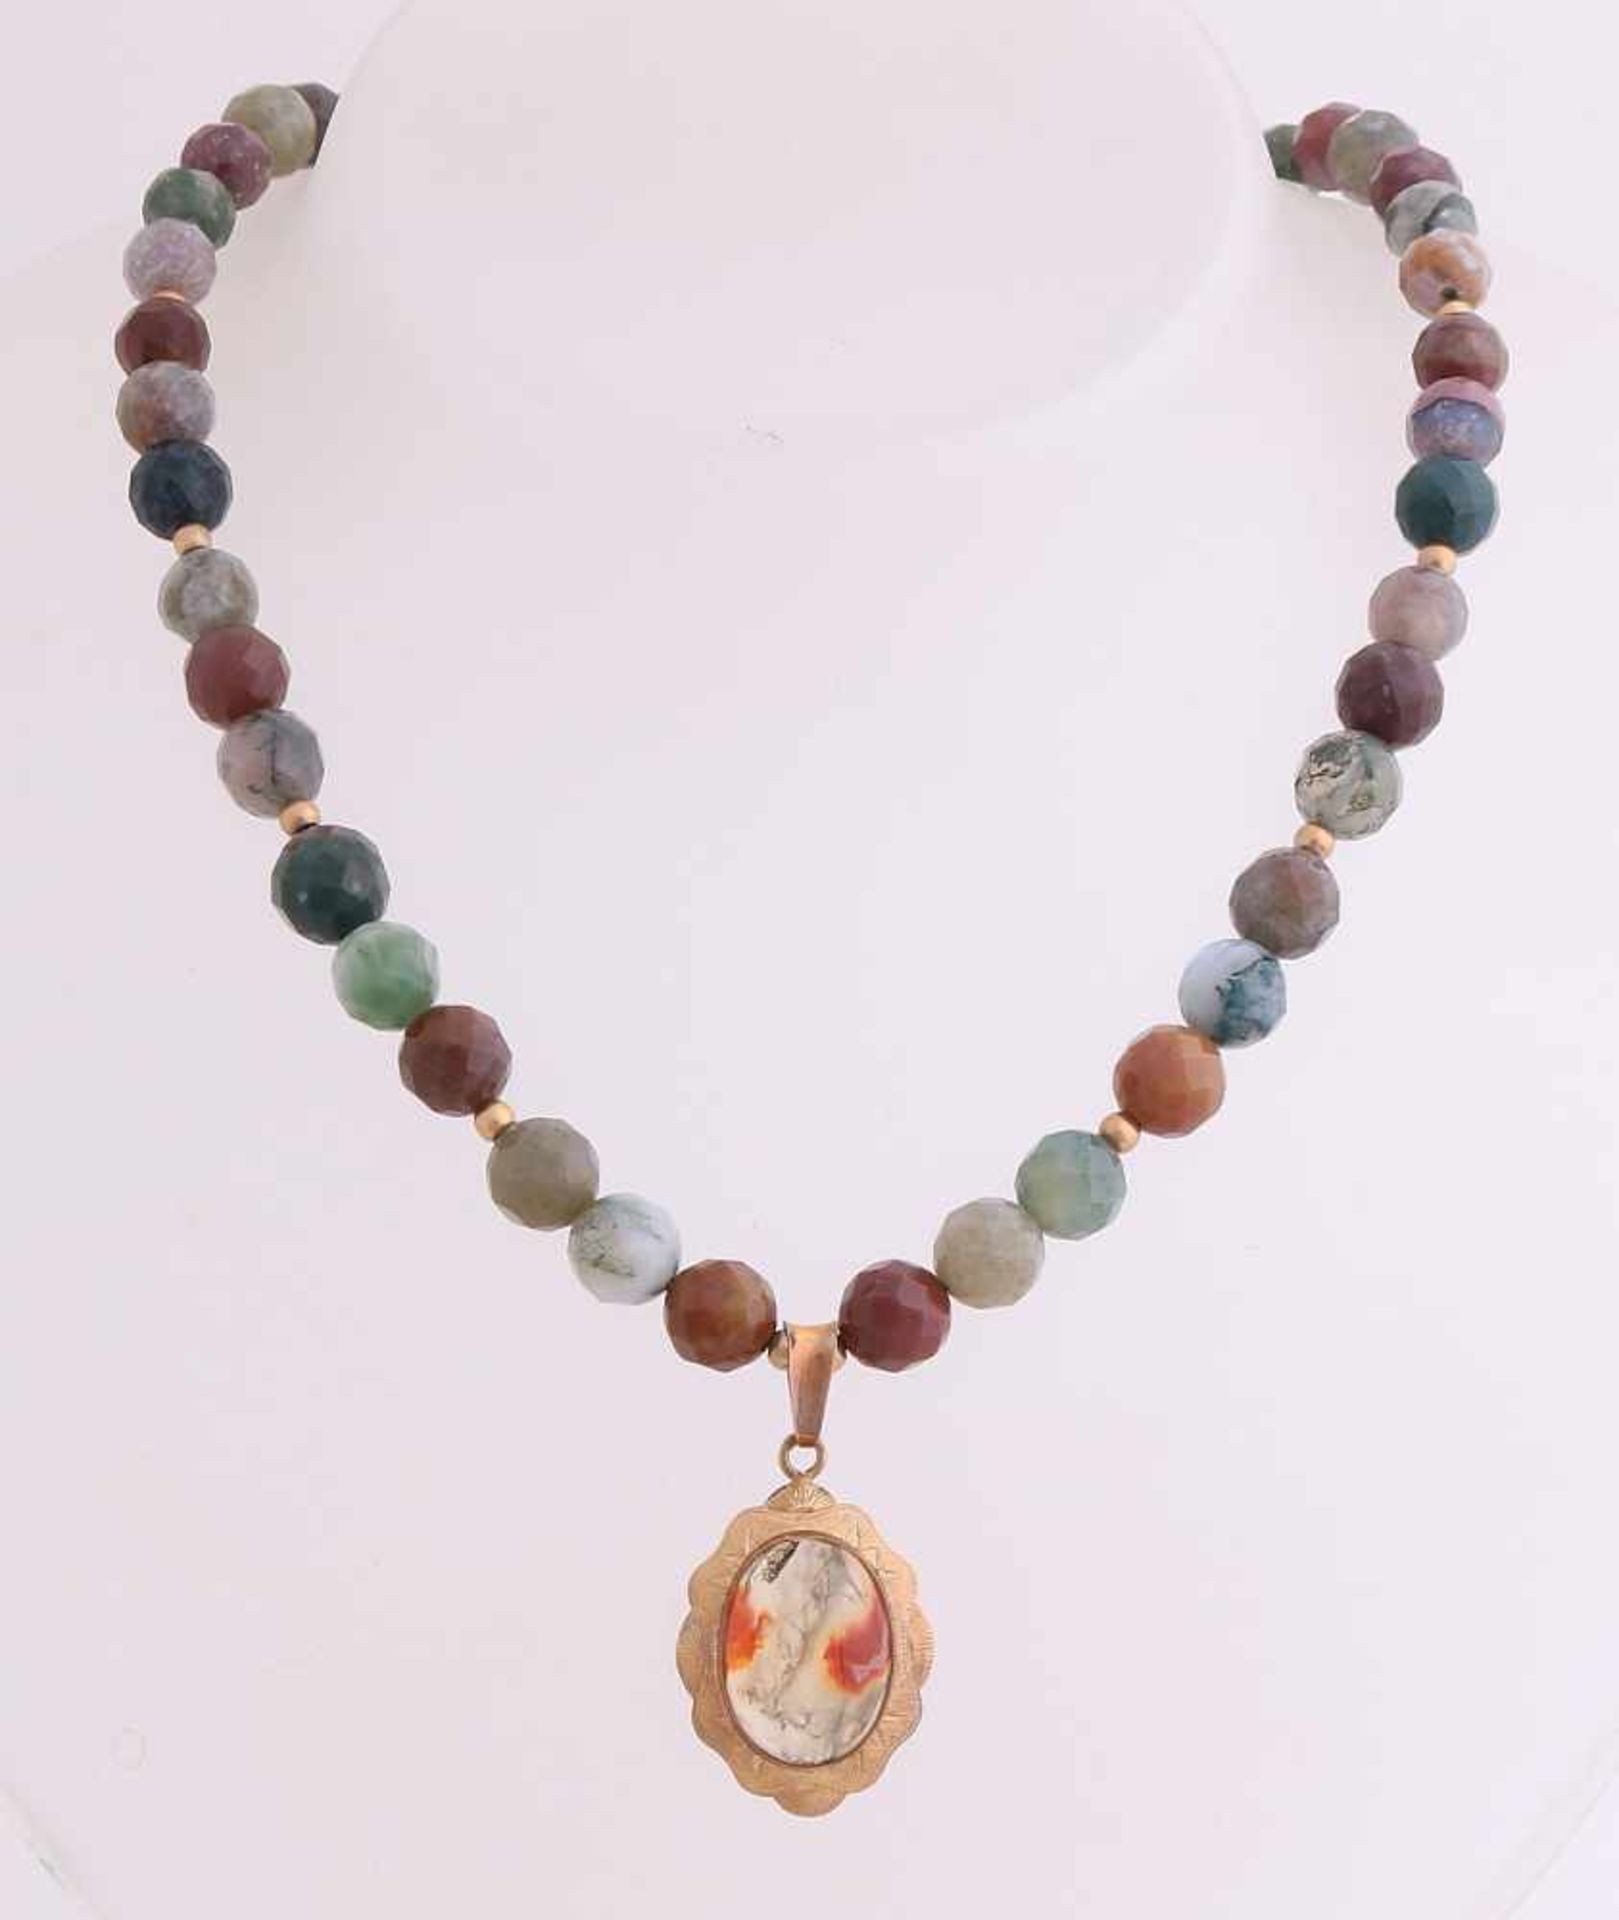 Necklace with agate and gold lock 585/000. A necklace of faceted agate, in the middle provided